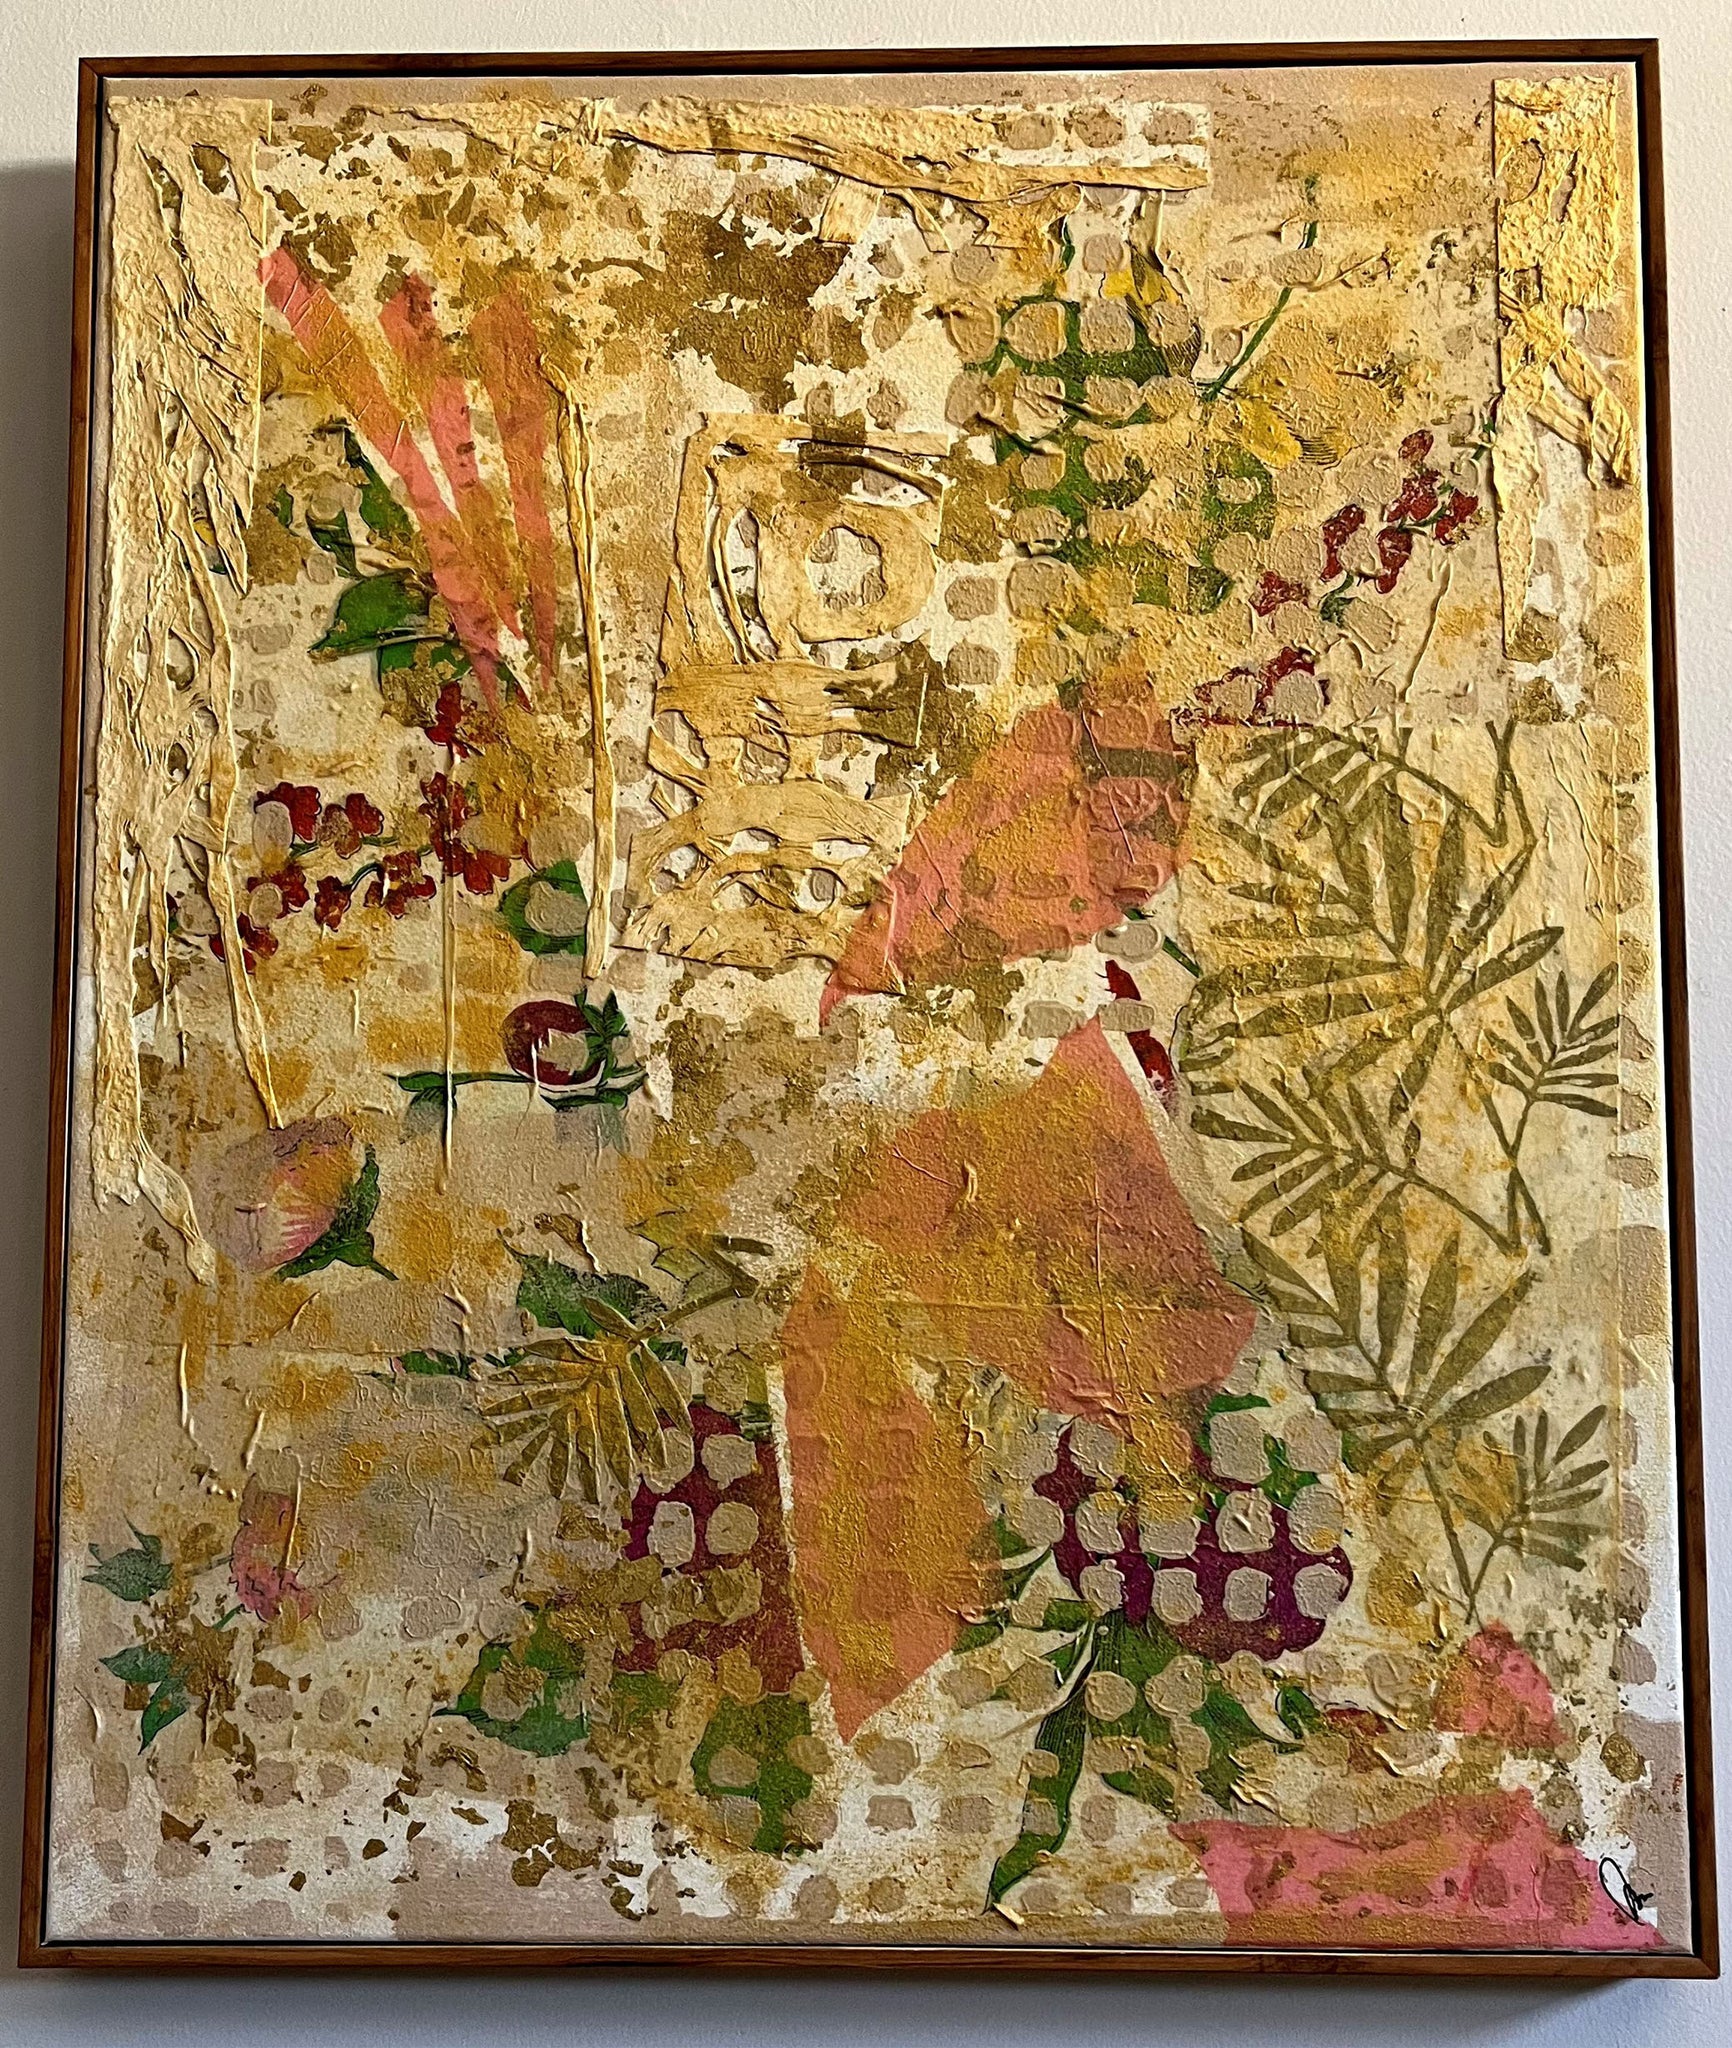 Faded Gold 1 by Pam Maschal